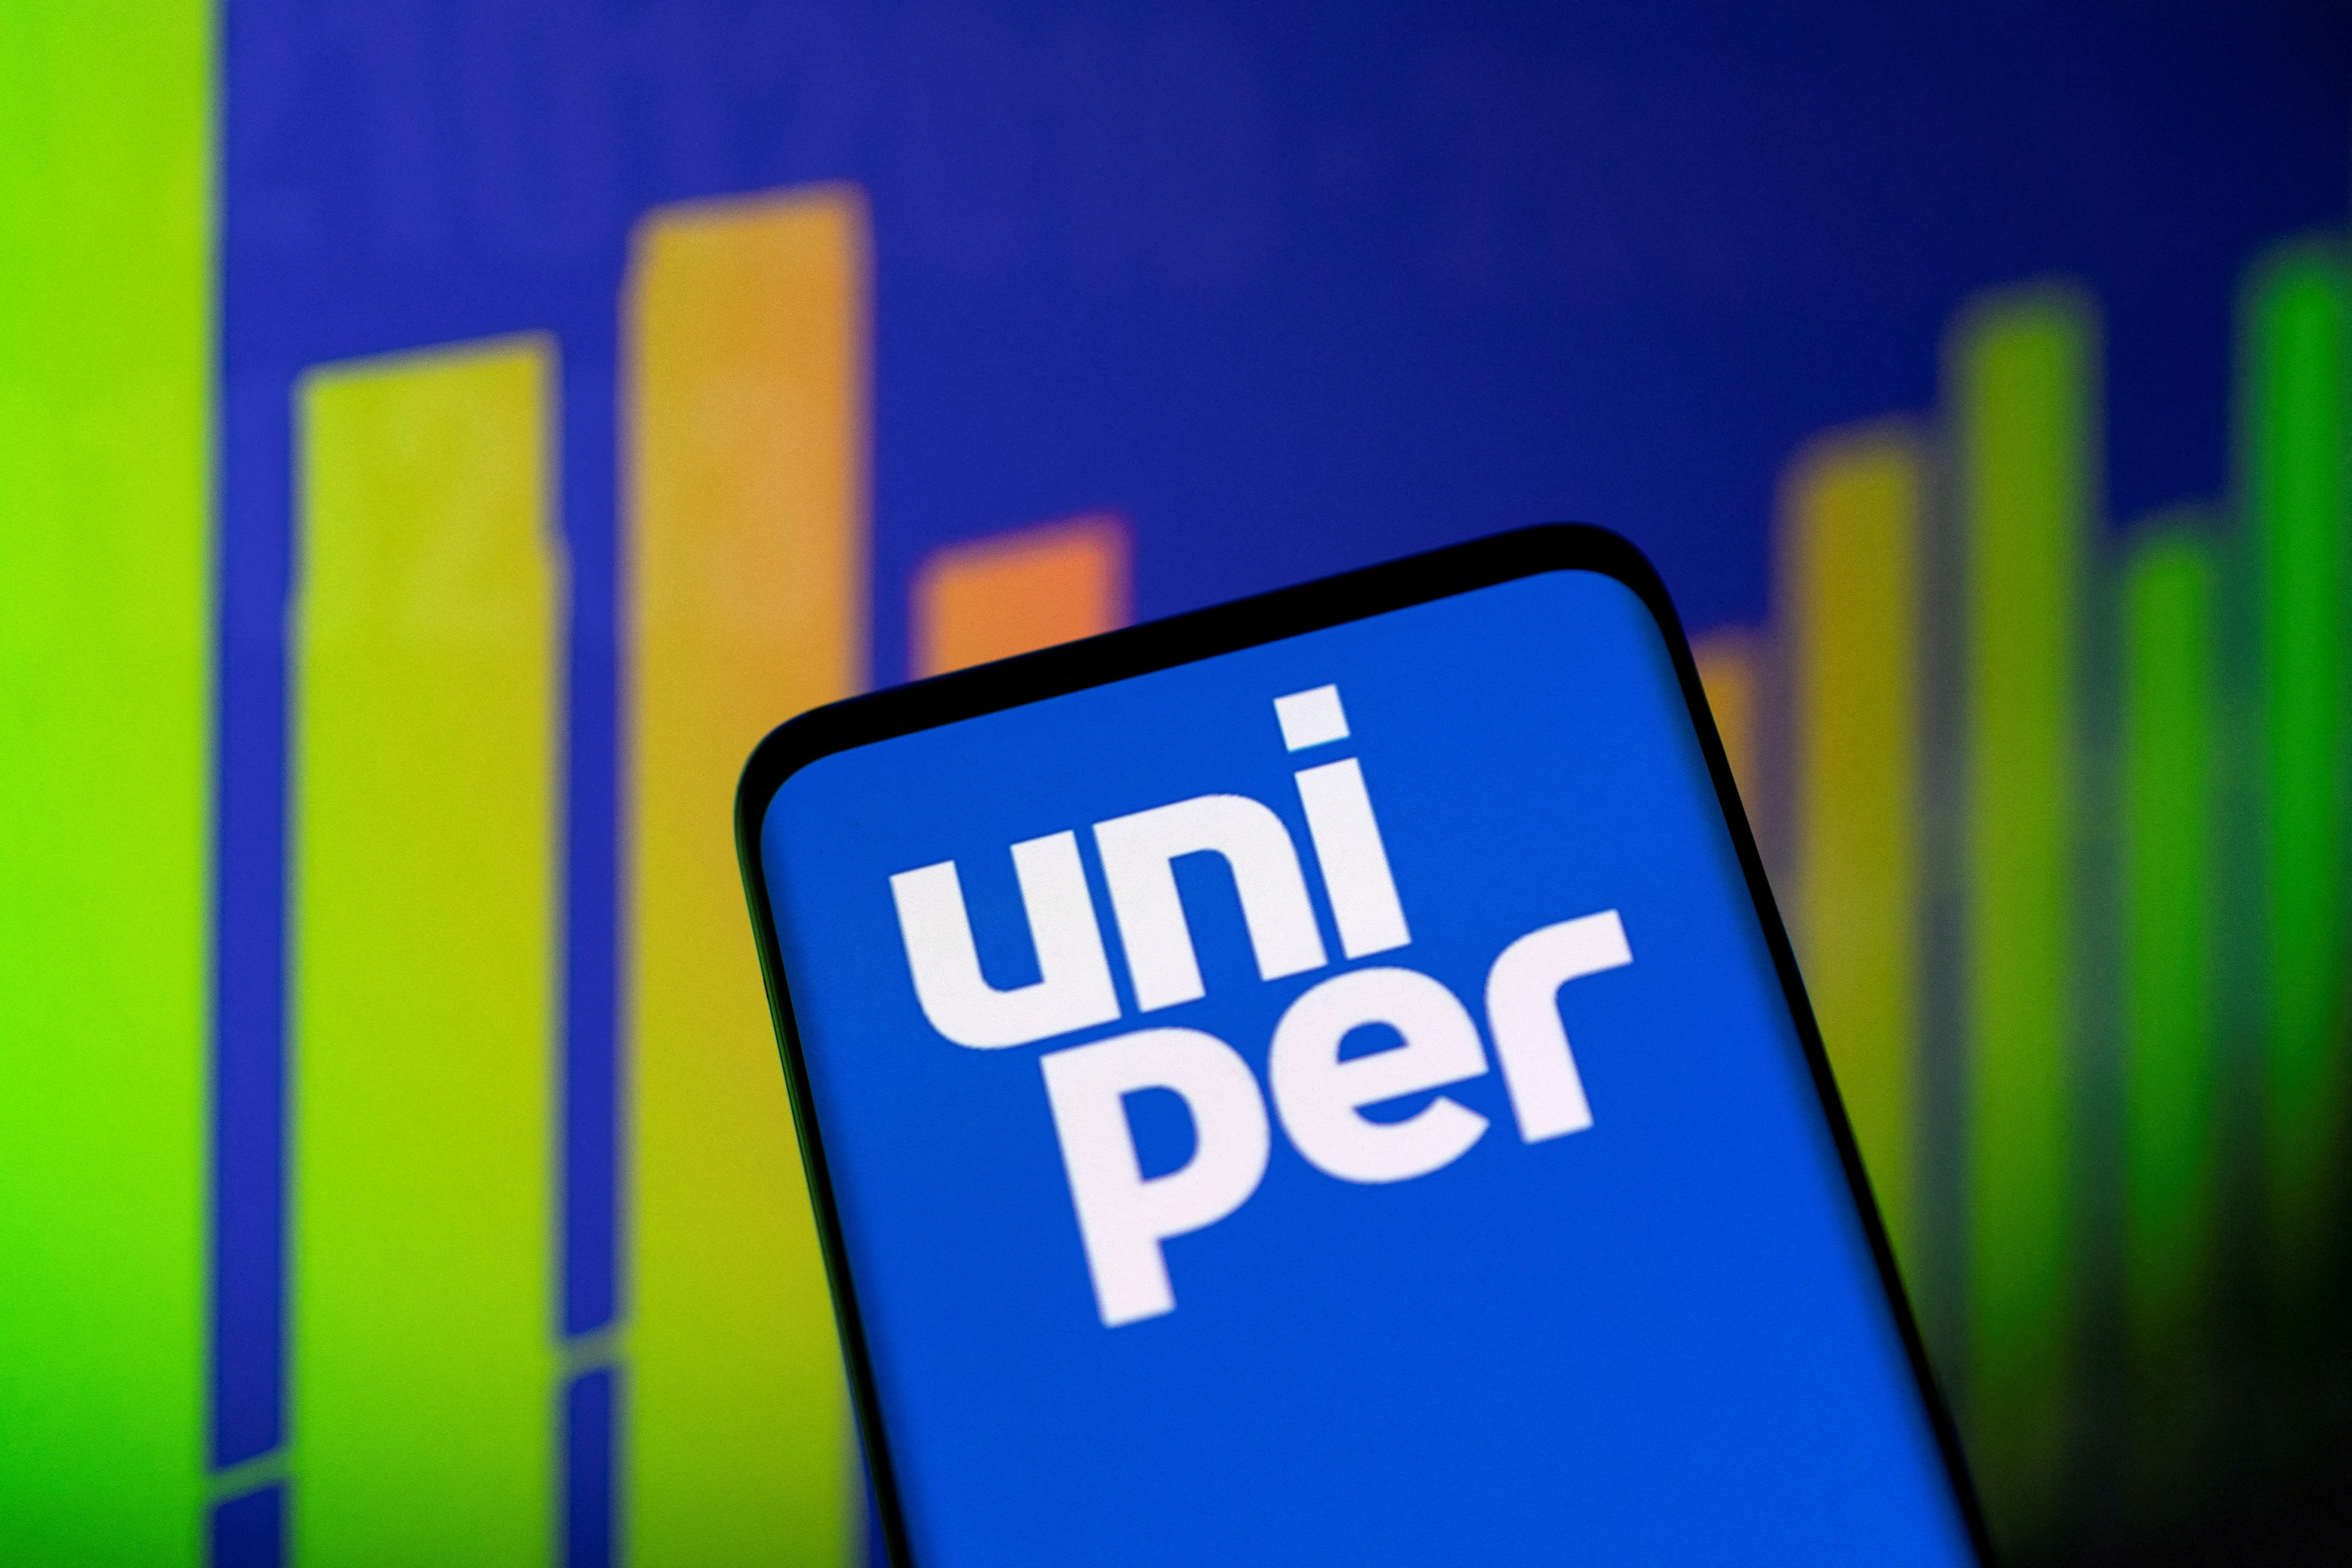 Illustration shows Uniper logo and stock graph